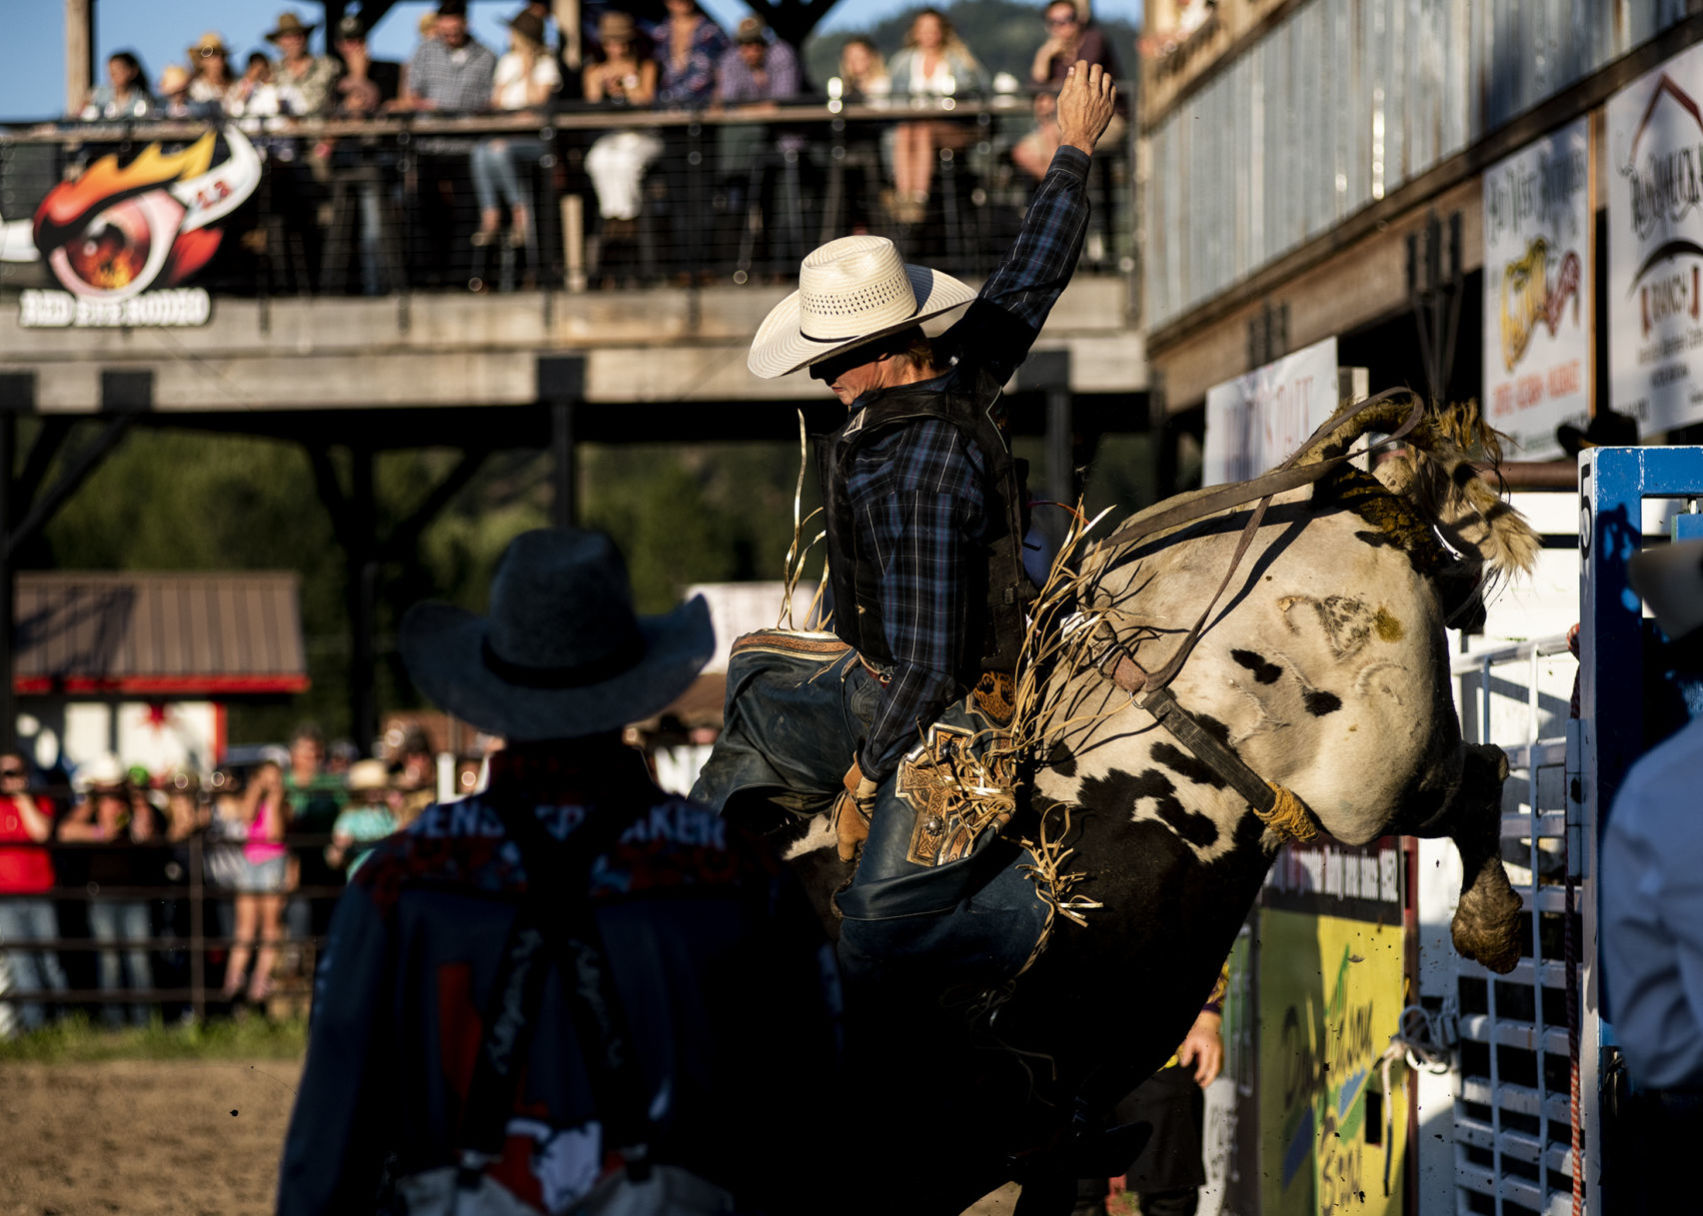 Polsons Payton Fitzpatrick delivers another strong performance in Darby bull riding event image